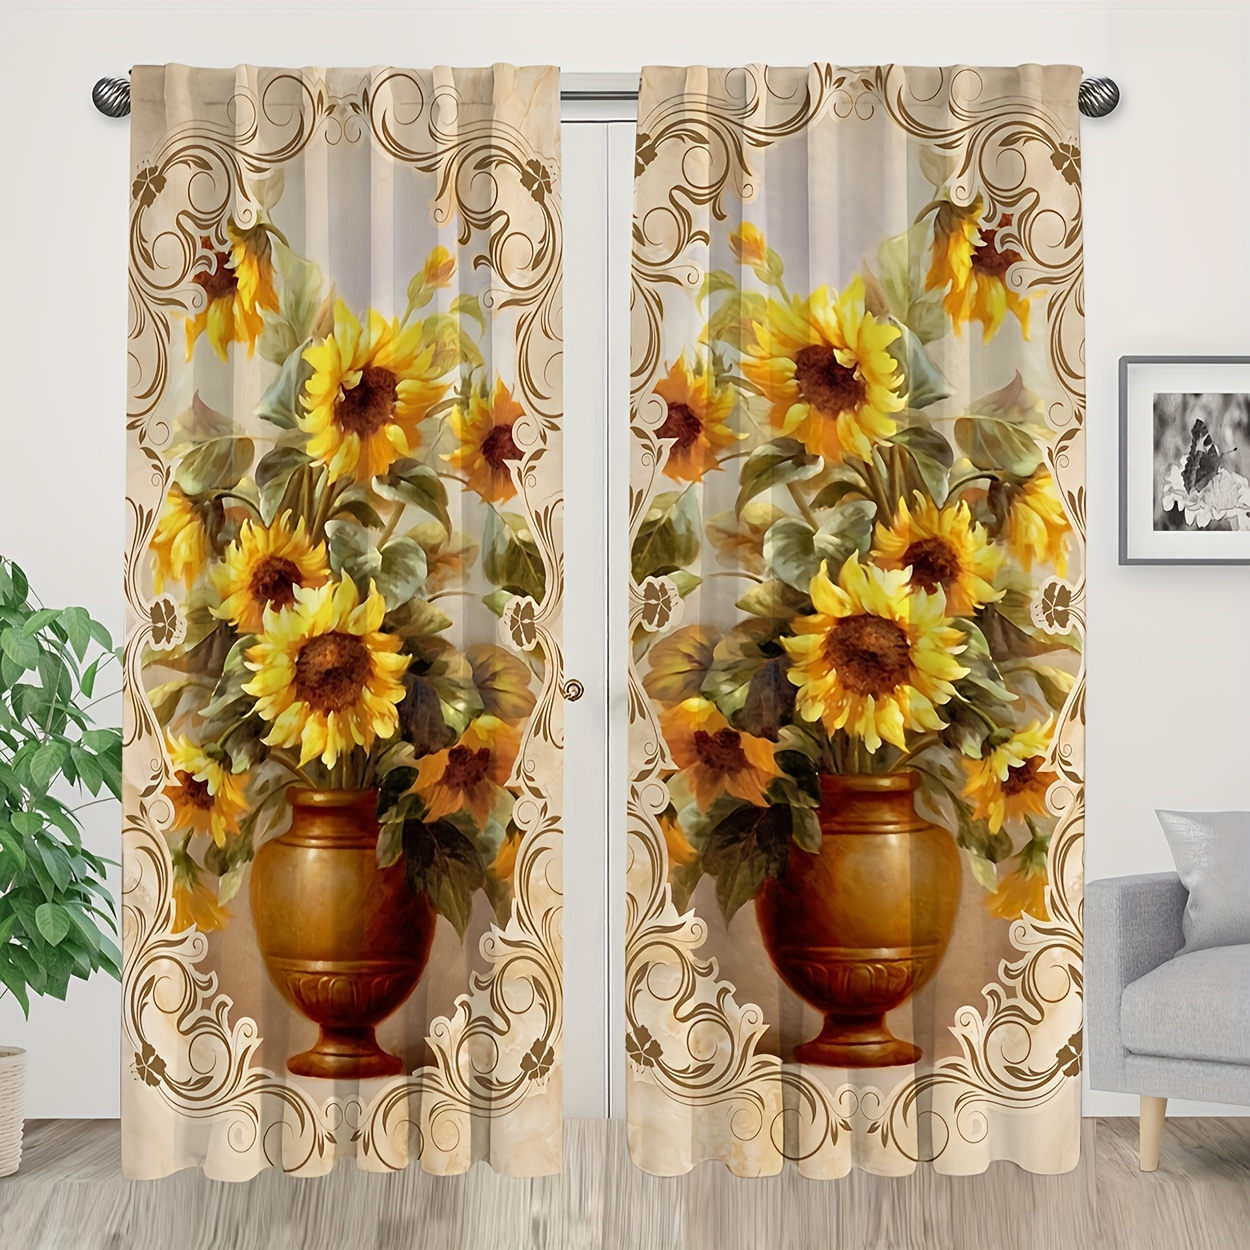 

2pcs Sunflower Prints Curtain Tiers, Semi-blackout Privacy Curtain Valance Set, Protective Window Drapes For Party, Gifts, Kitchen, Office, Bedroom, Home Decoration